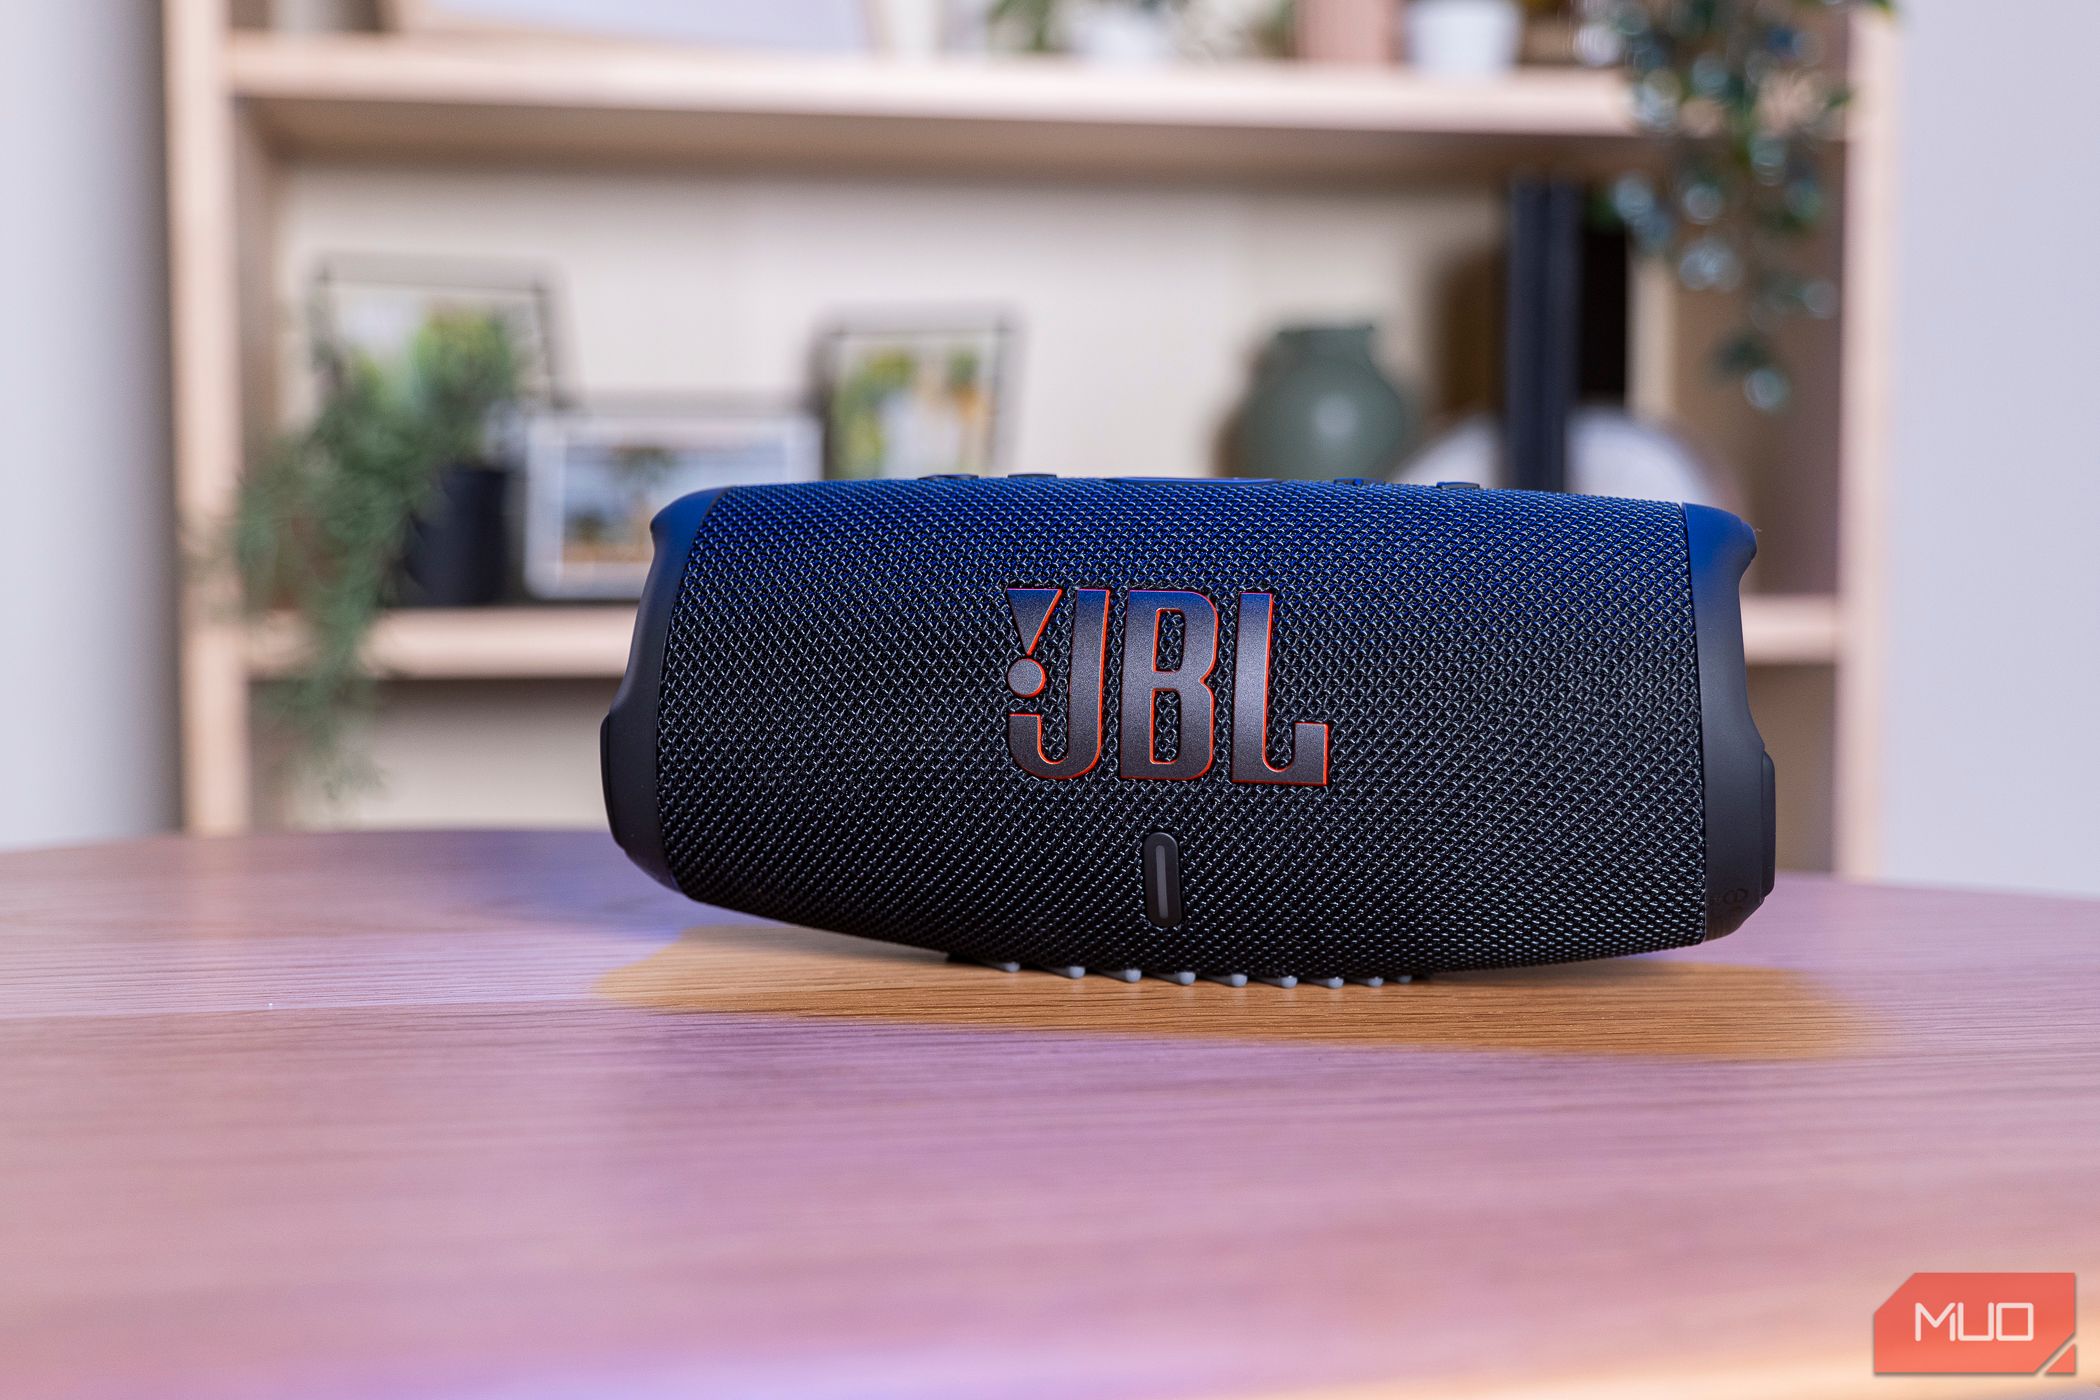 The front of the JBL Charge 5